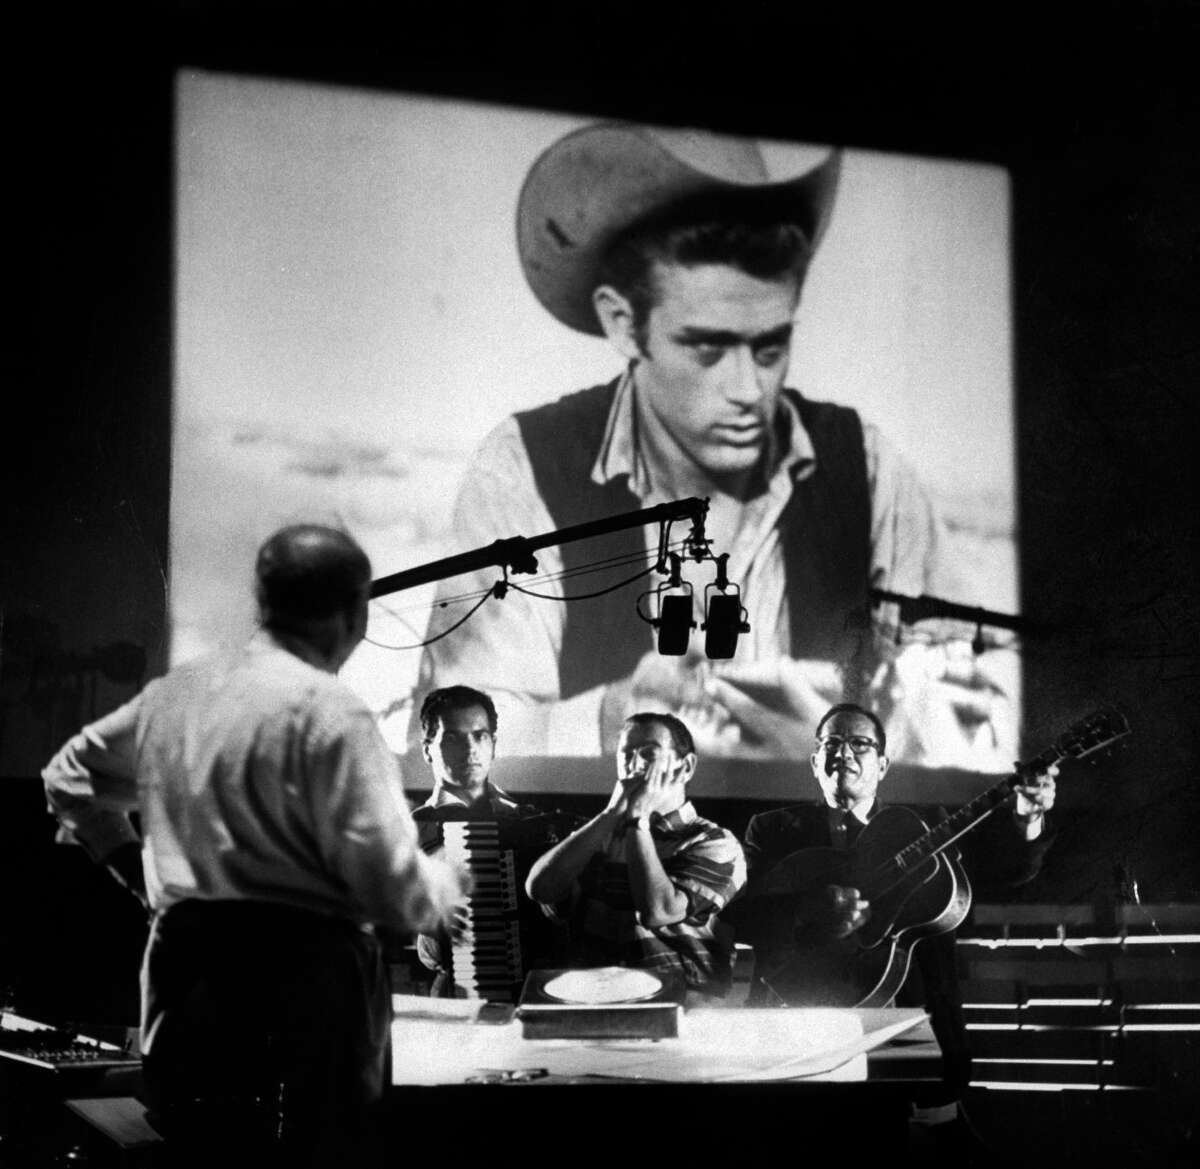 Photos of the 1956 film "Giant" and late actor James Dean Composer Dimitri Tiomkin (L) directing the muscial score for the last James Dean movie produced 'Giant'.